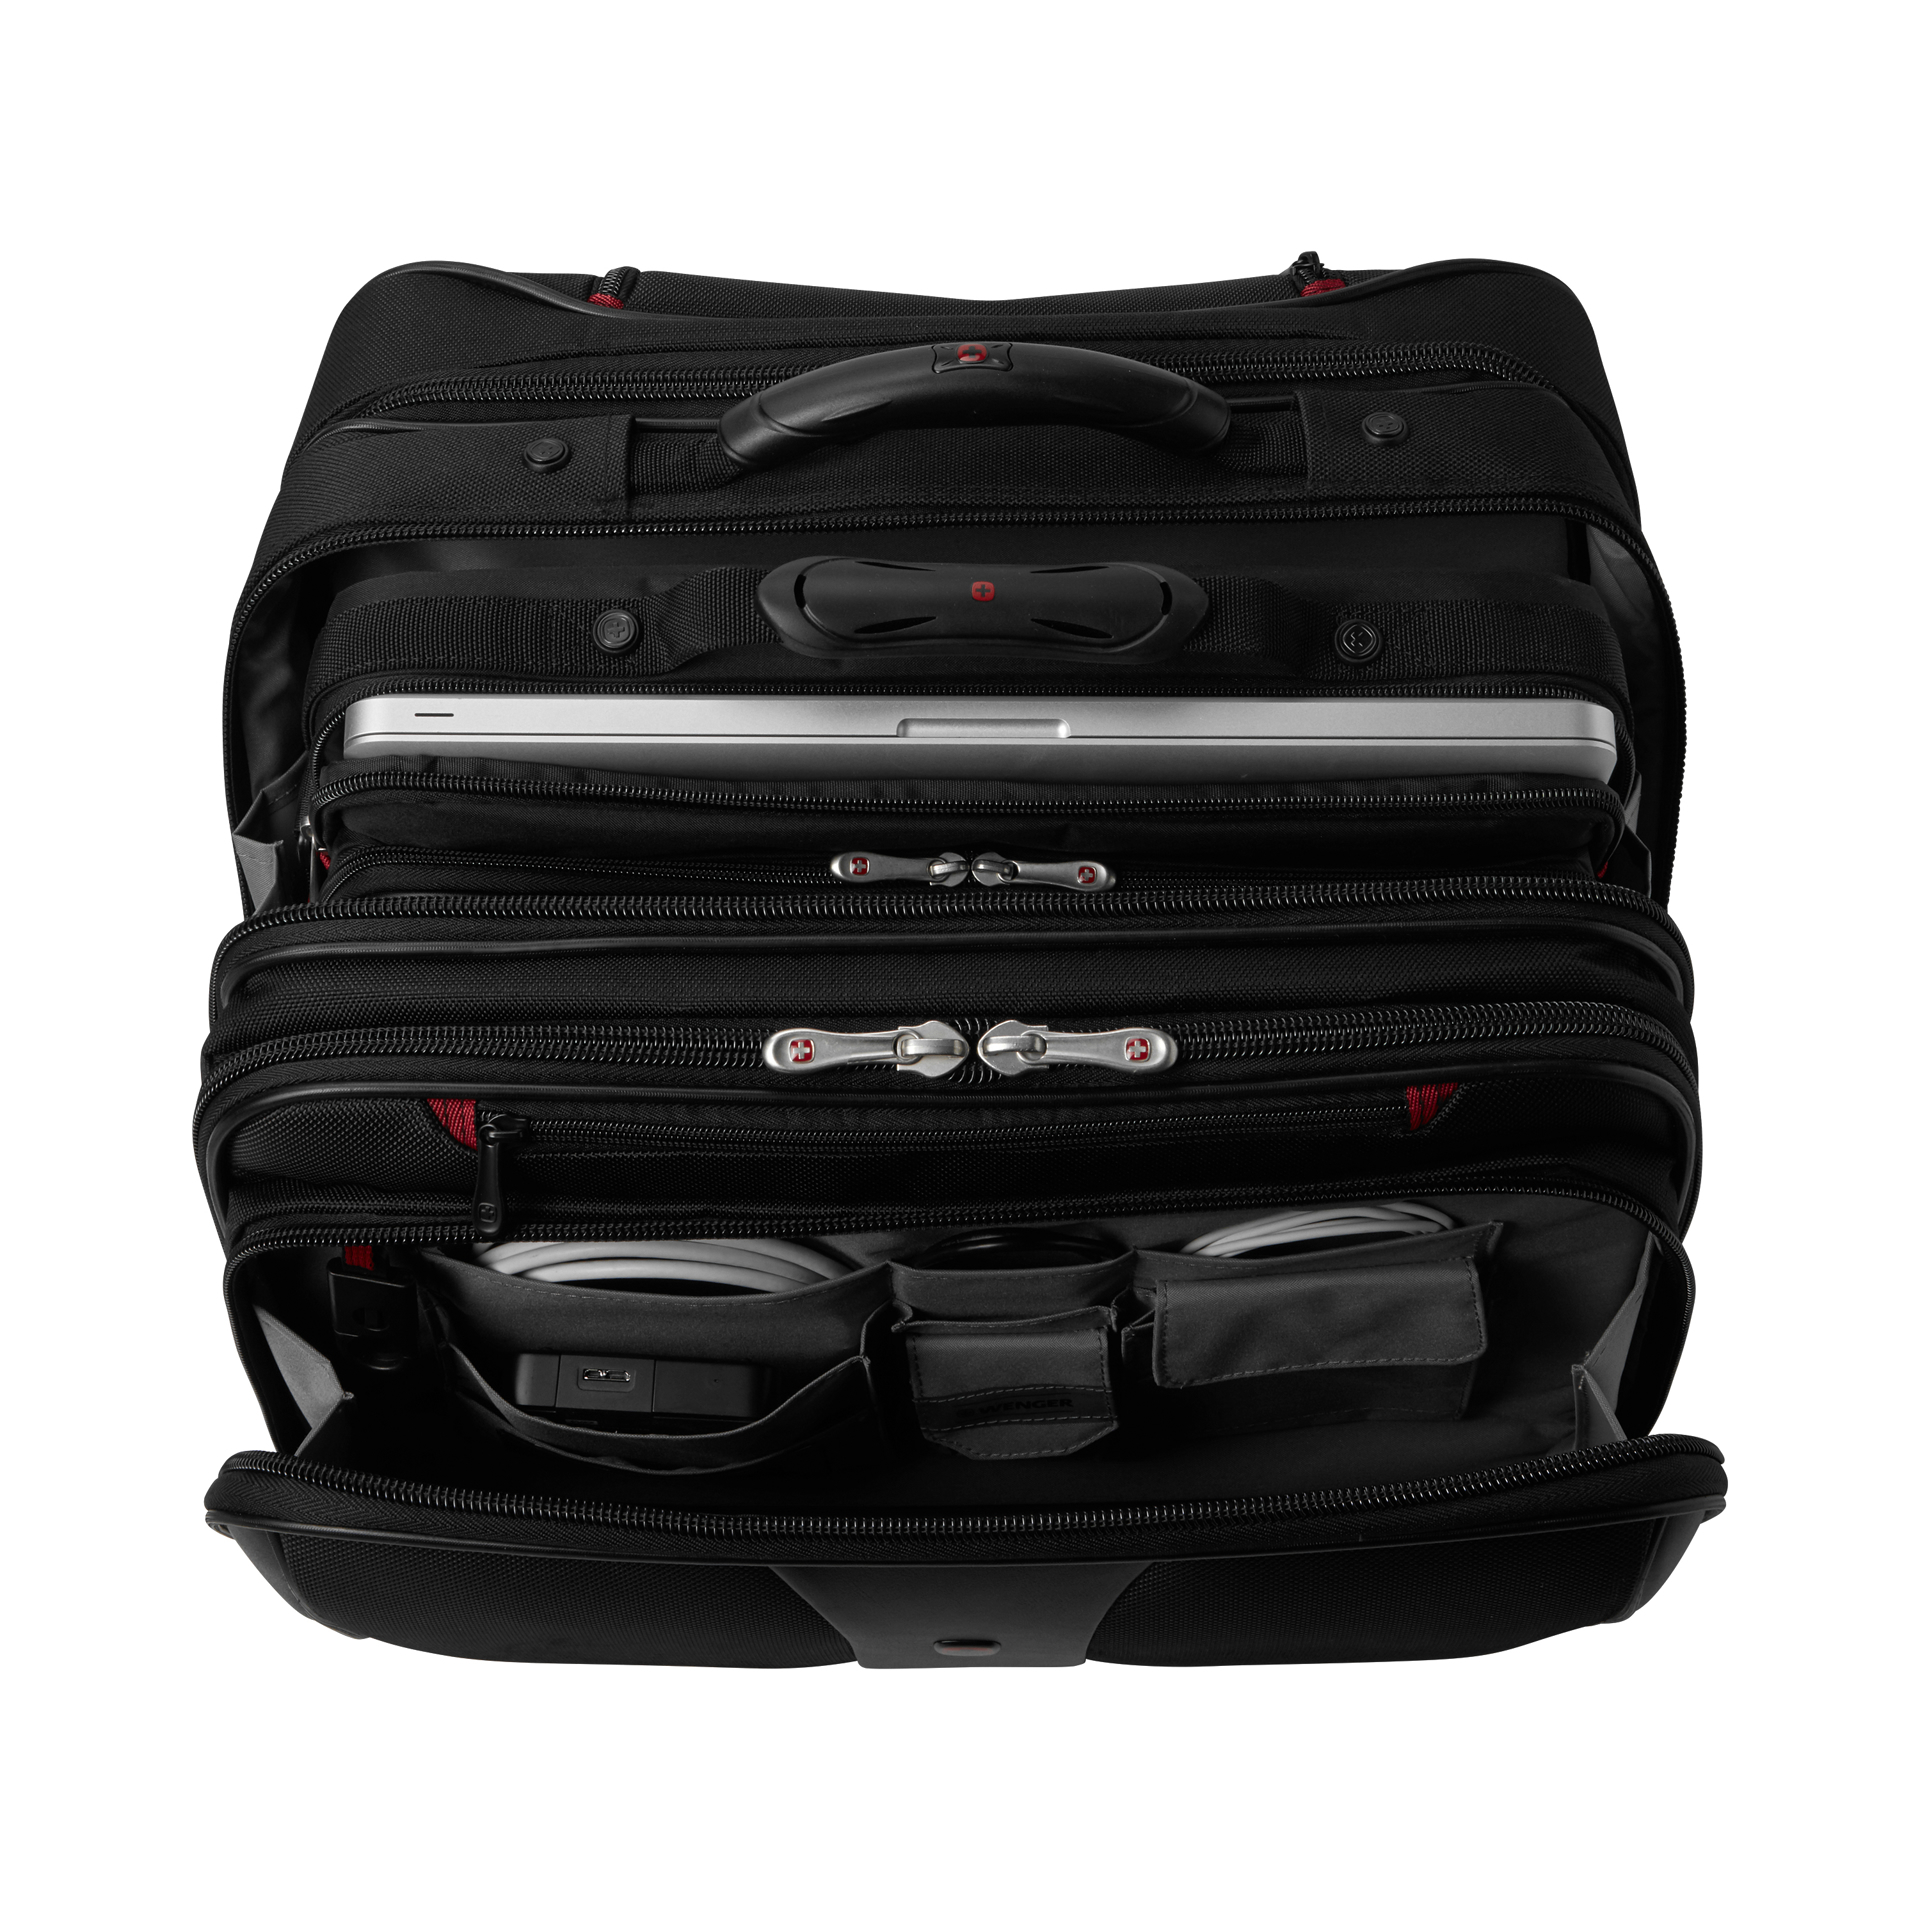 Wenger Patriot Travel Set showing inner compartments